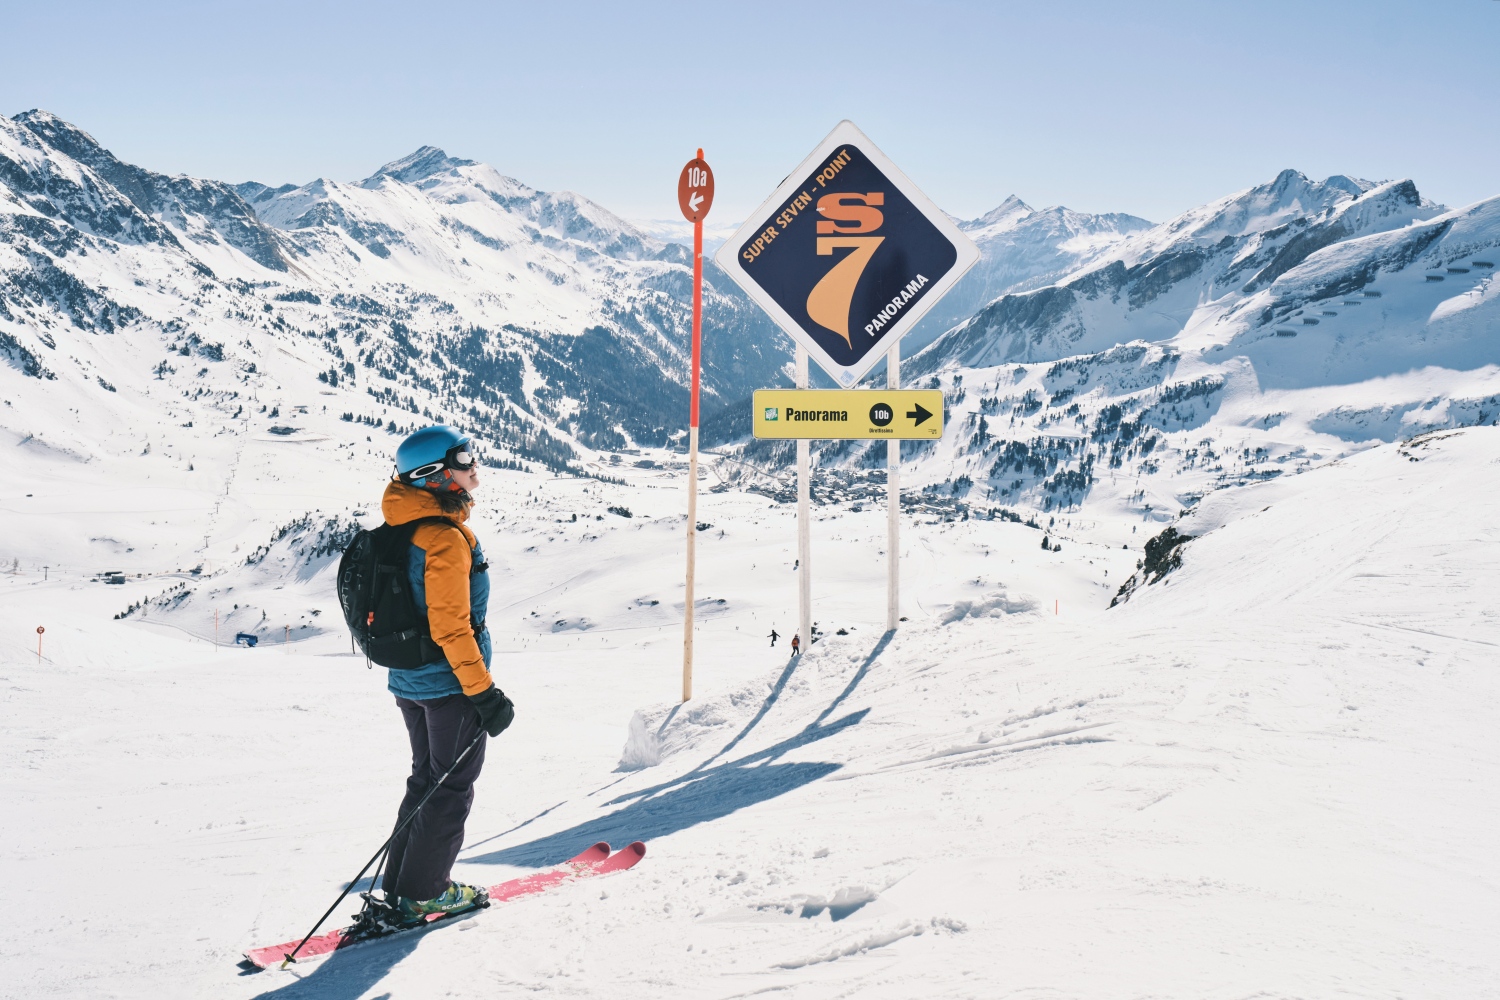 Skier next to sign in mountains